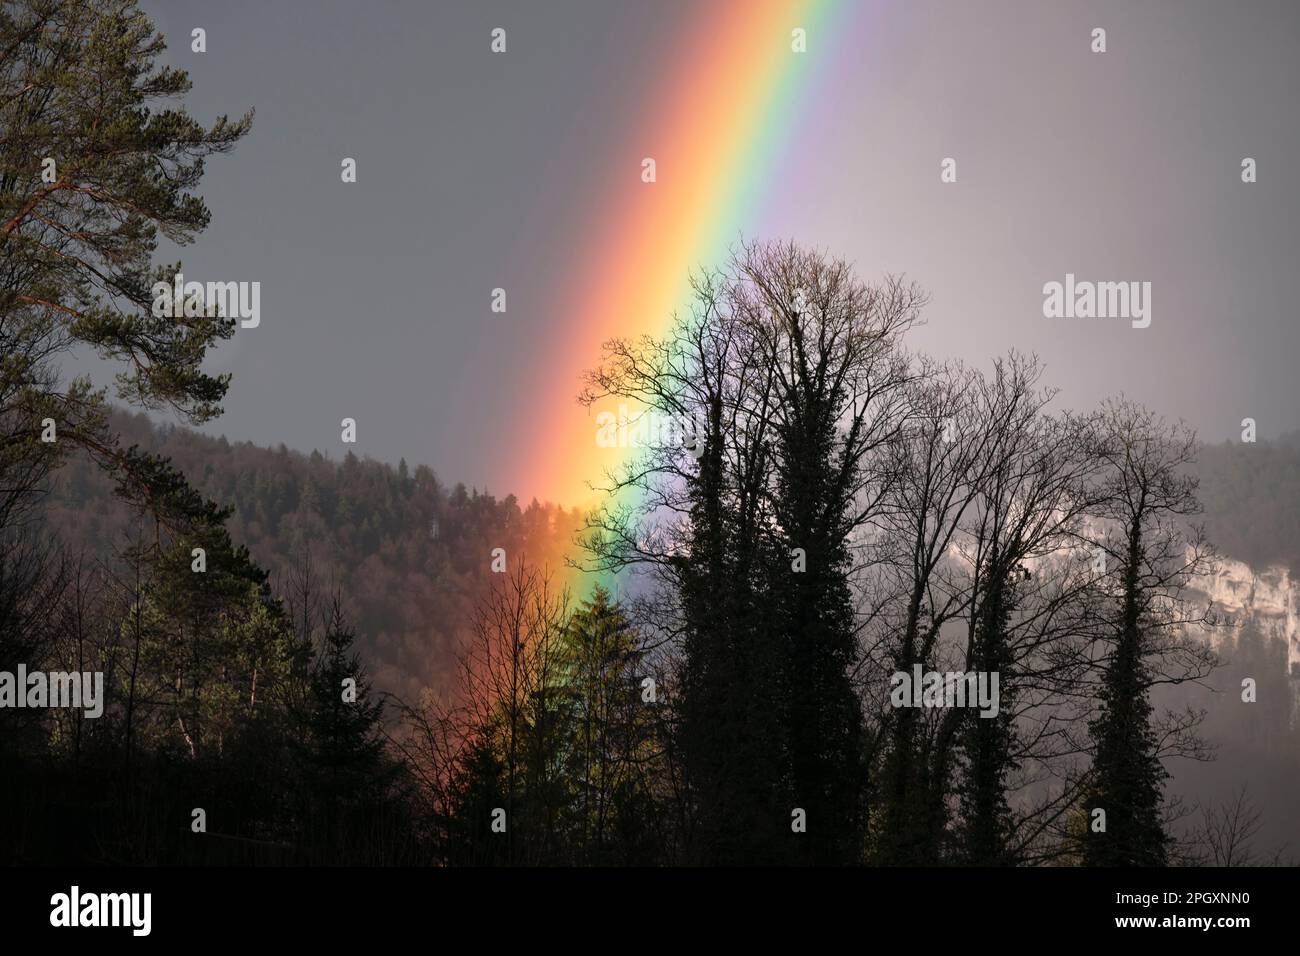 Bright, intensive rainbow close-up with dark trees silhouette. Scenic rainbow with mountain landscape. Weather after storm. Stock Photo